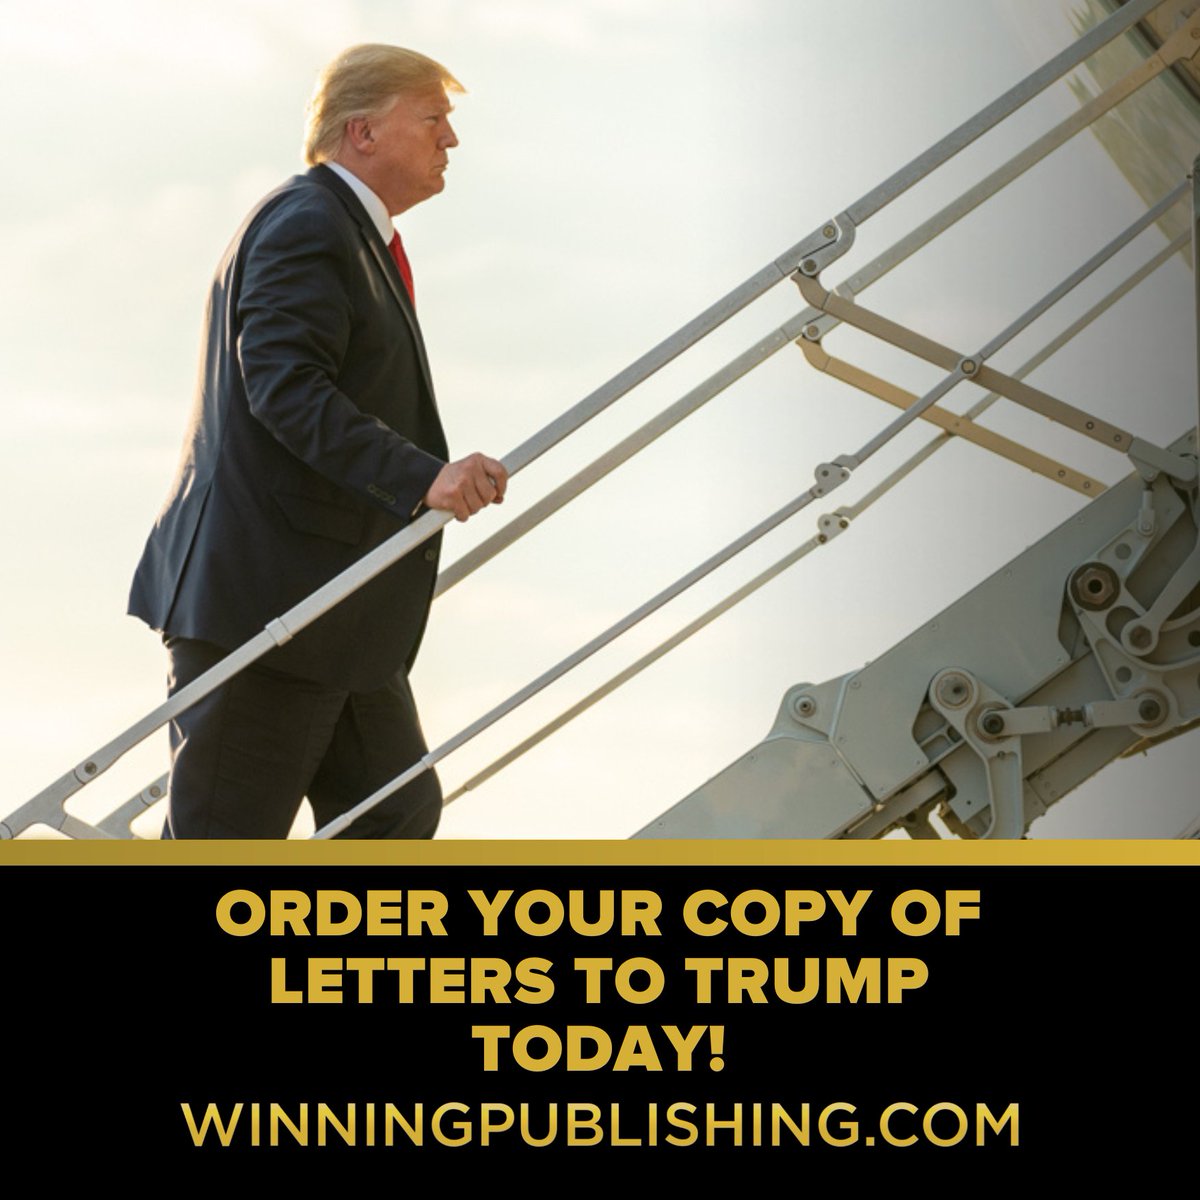 Go to WINNINGPUBLISHING.com today to order your copy of LETTERS TO TRUMP!